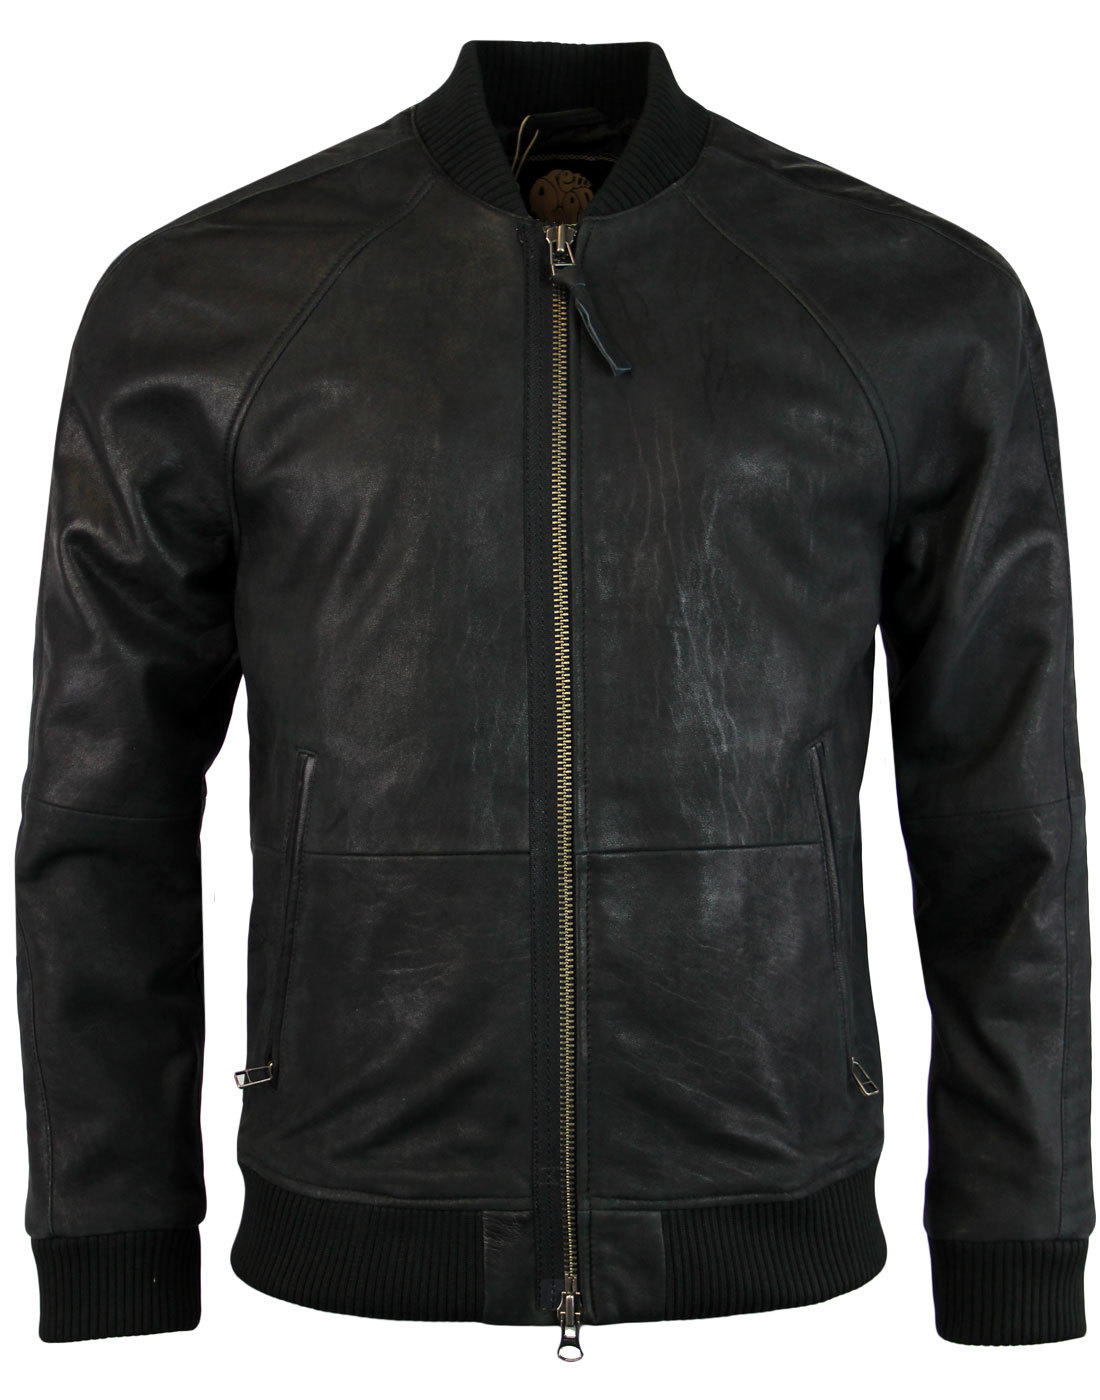 PRETTY GREEN Albion Retro 1970s Indie Leather Bomber Jacket Black